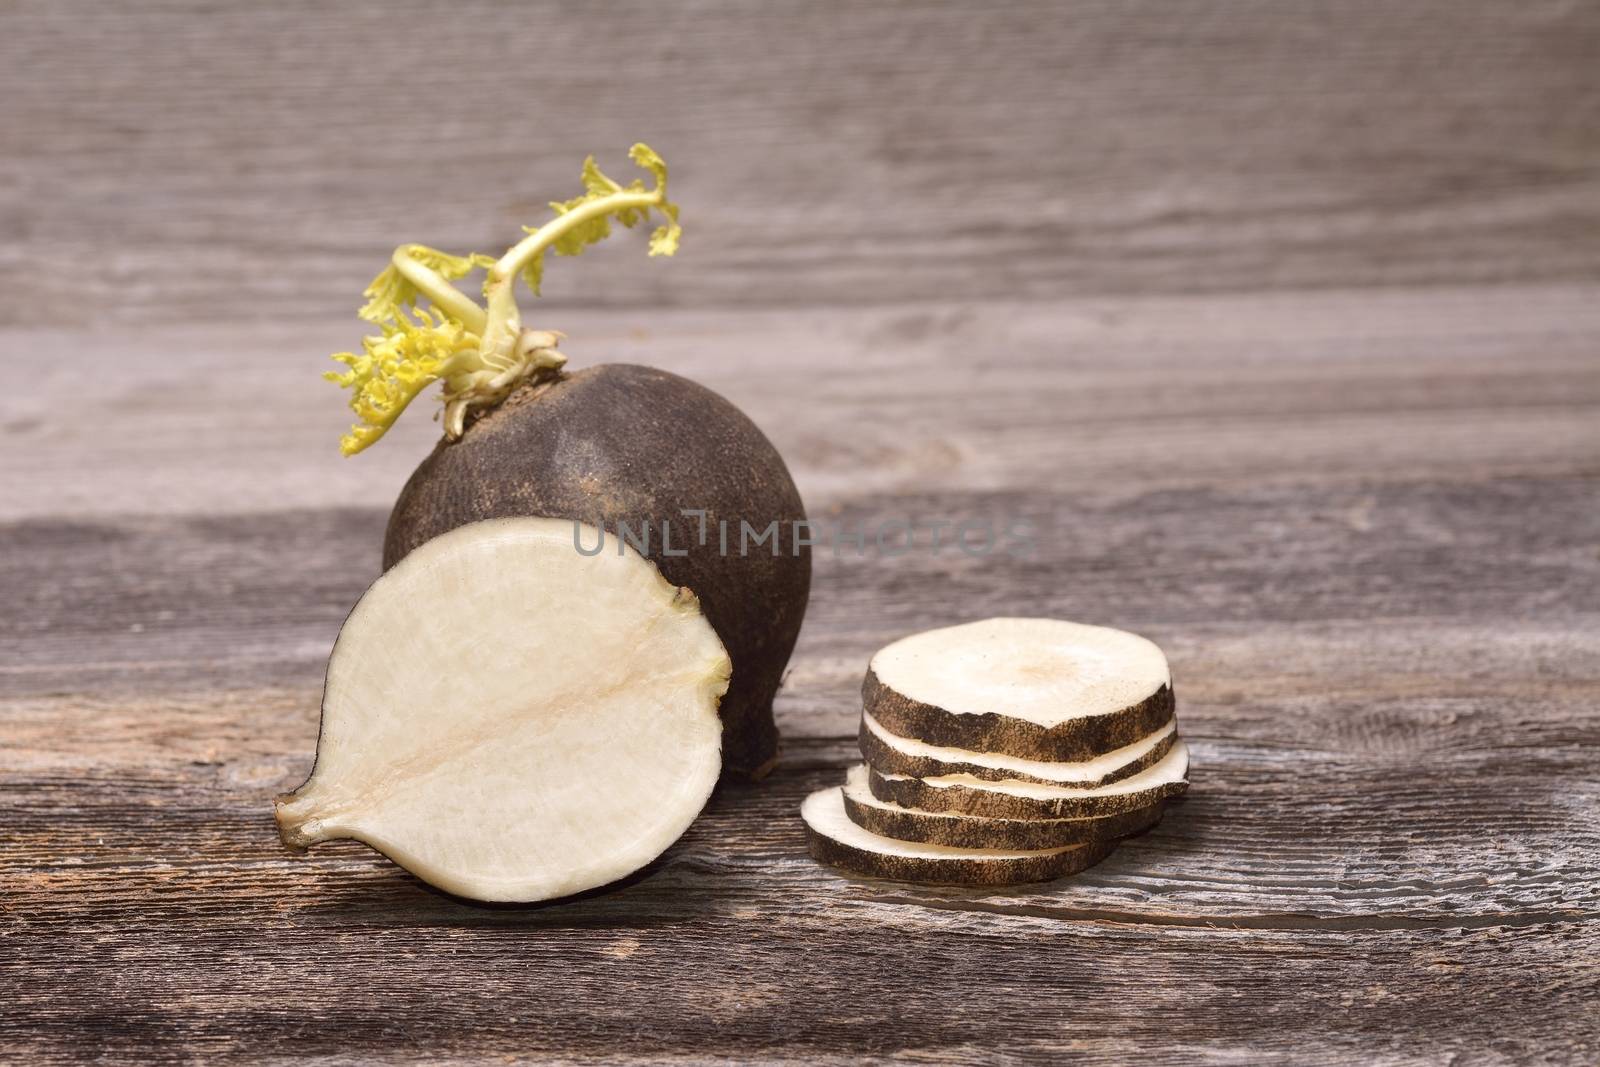 Black radish on wooden background by comet